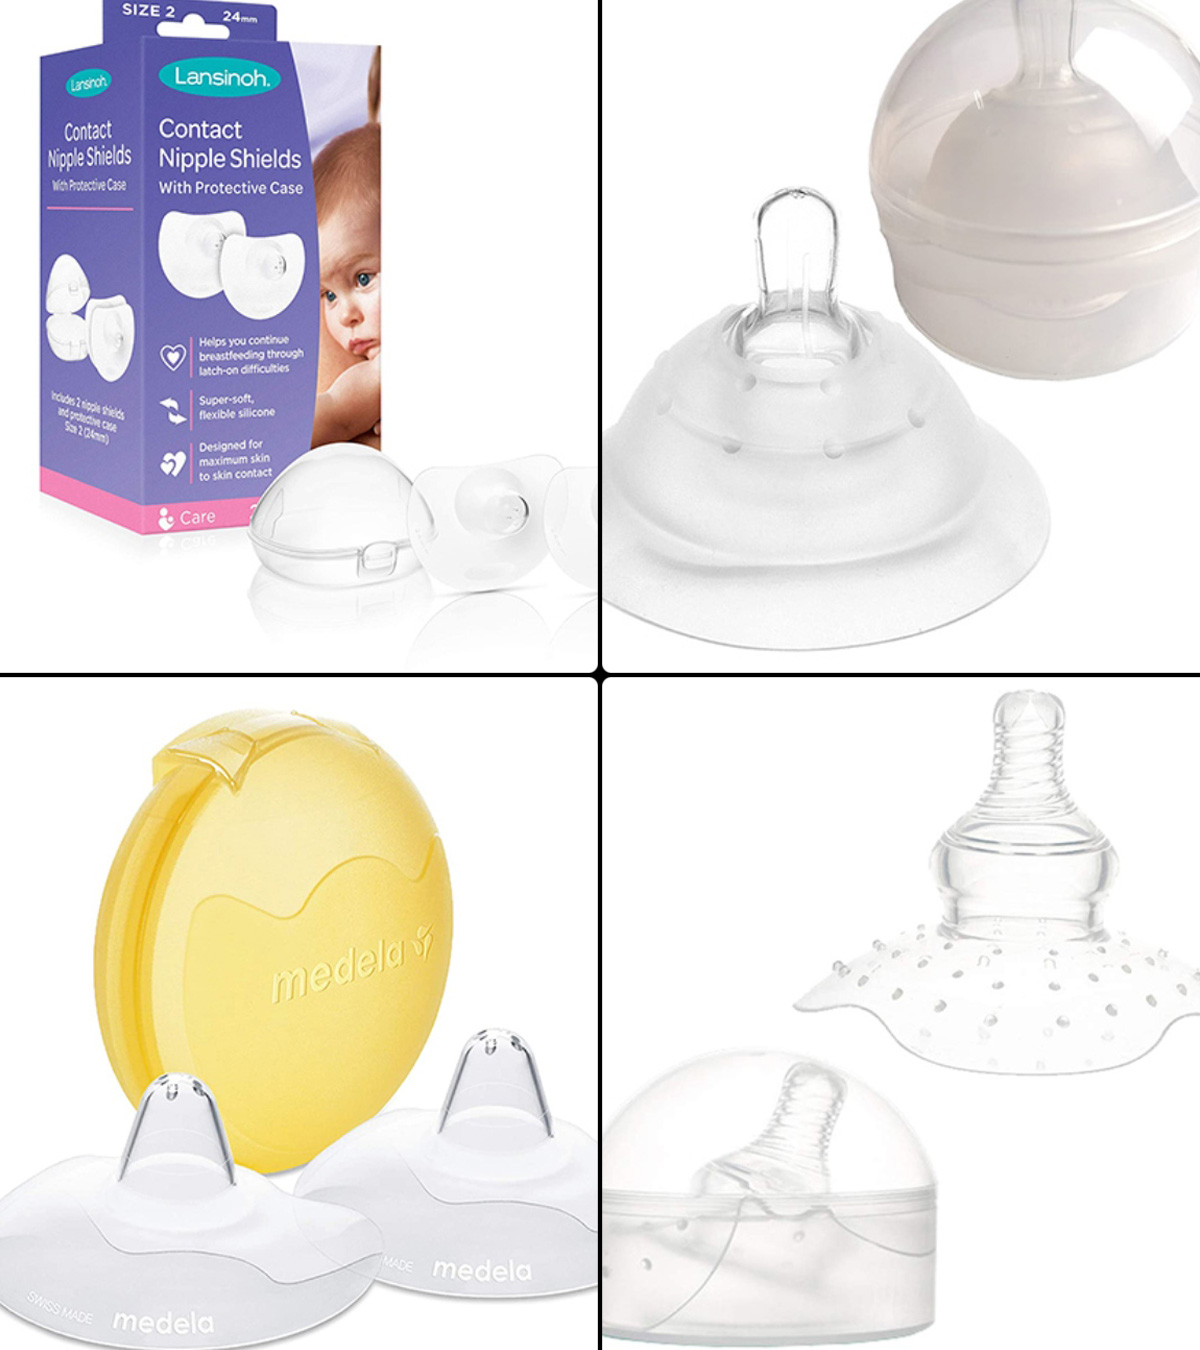 How to use a nipple shield CORRECTLY to overcome breastfeeding challen